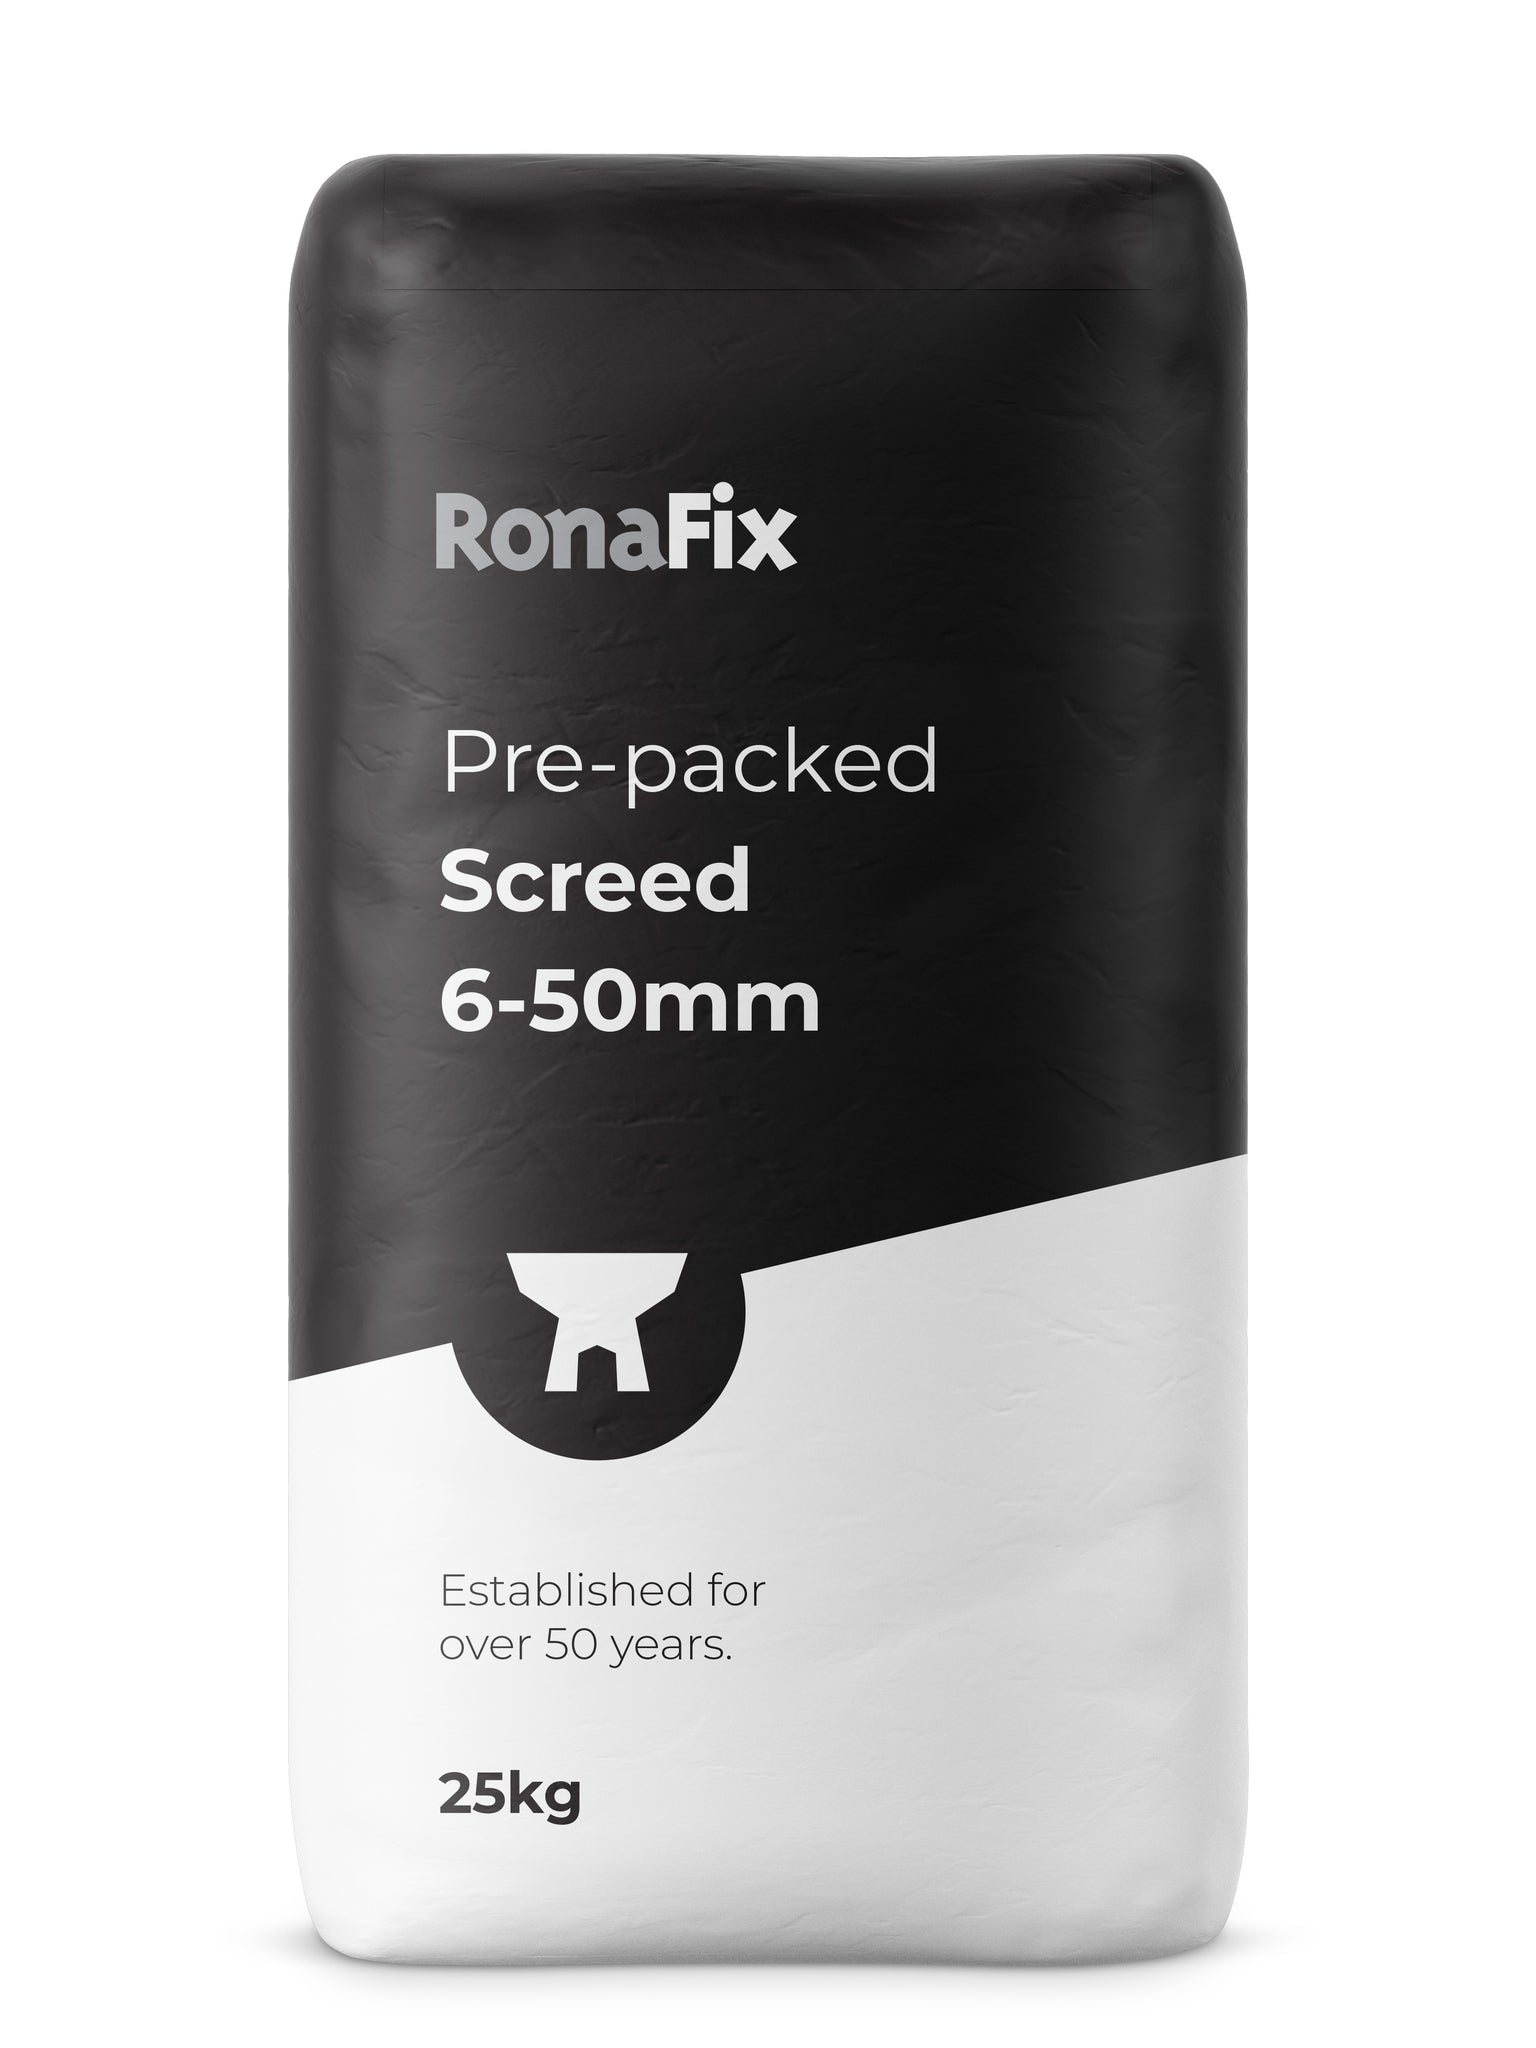 Ronafix Pre-packed Screed 6-50mm - Ready to use mortar for laying floor screeds